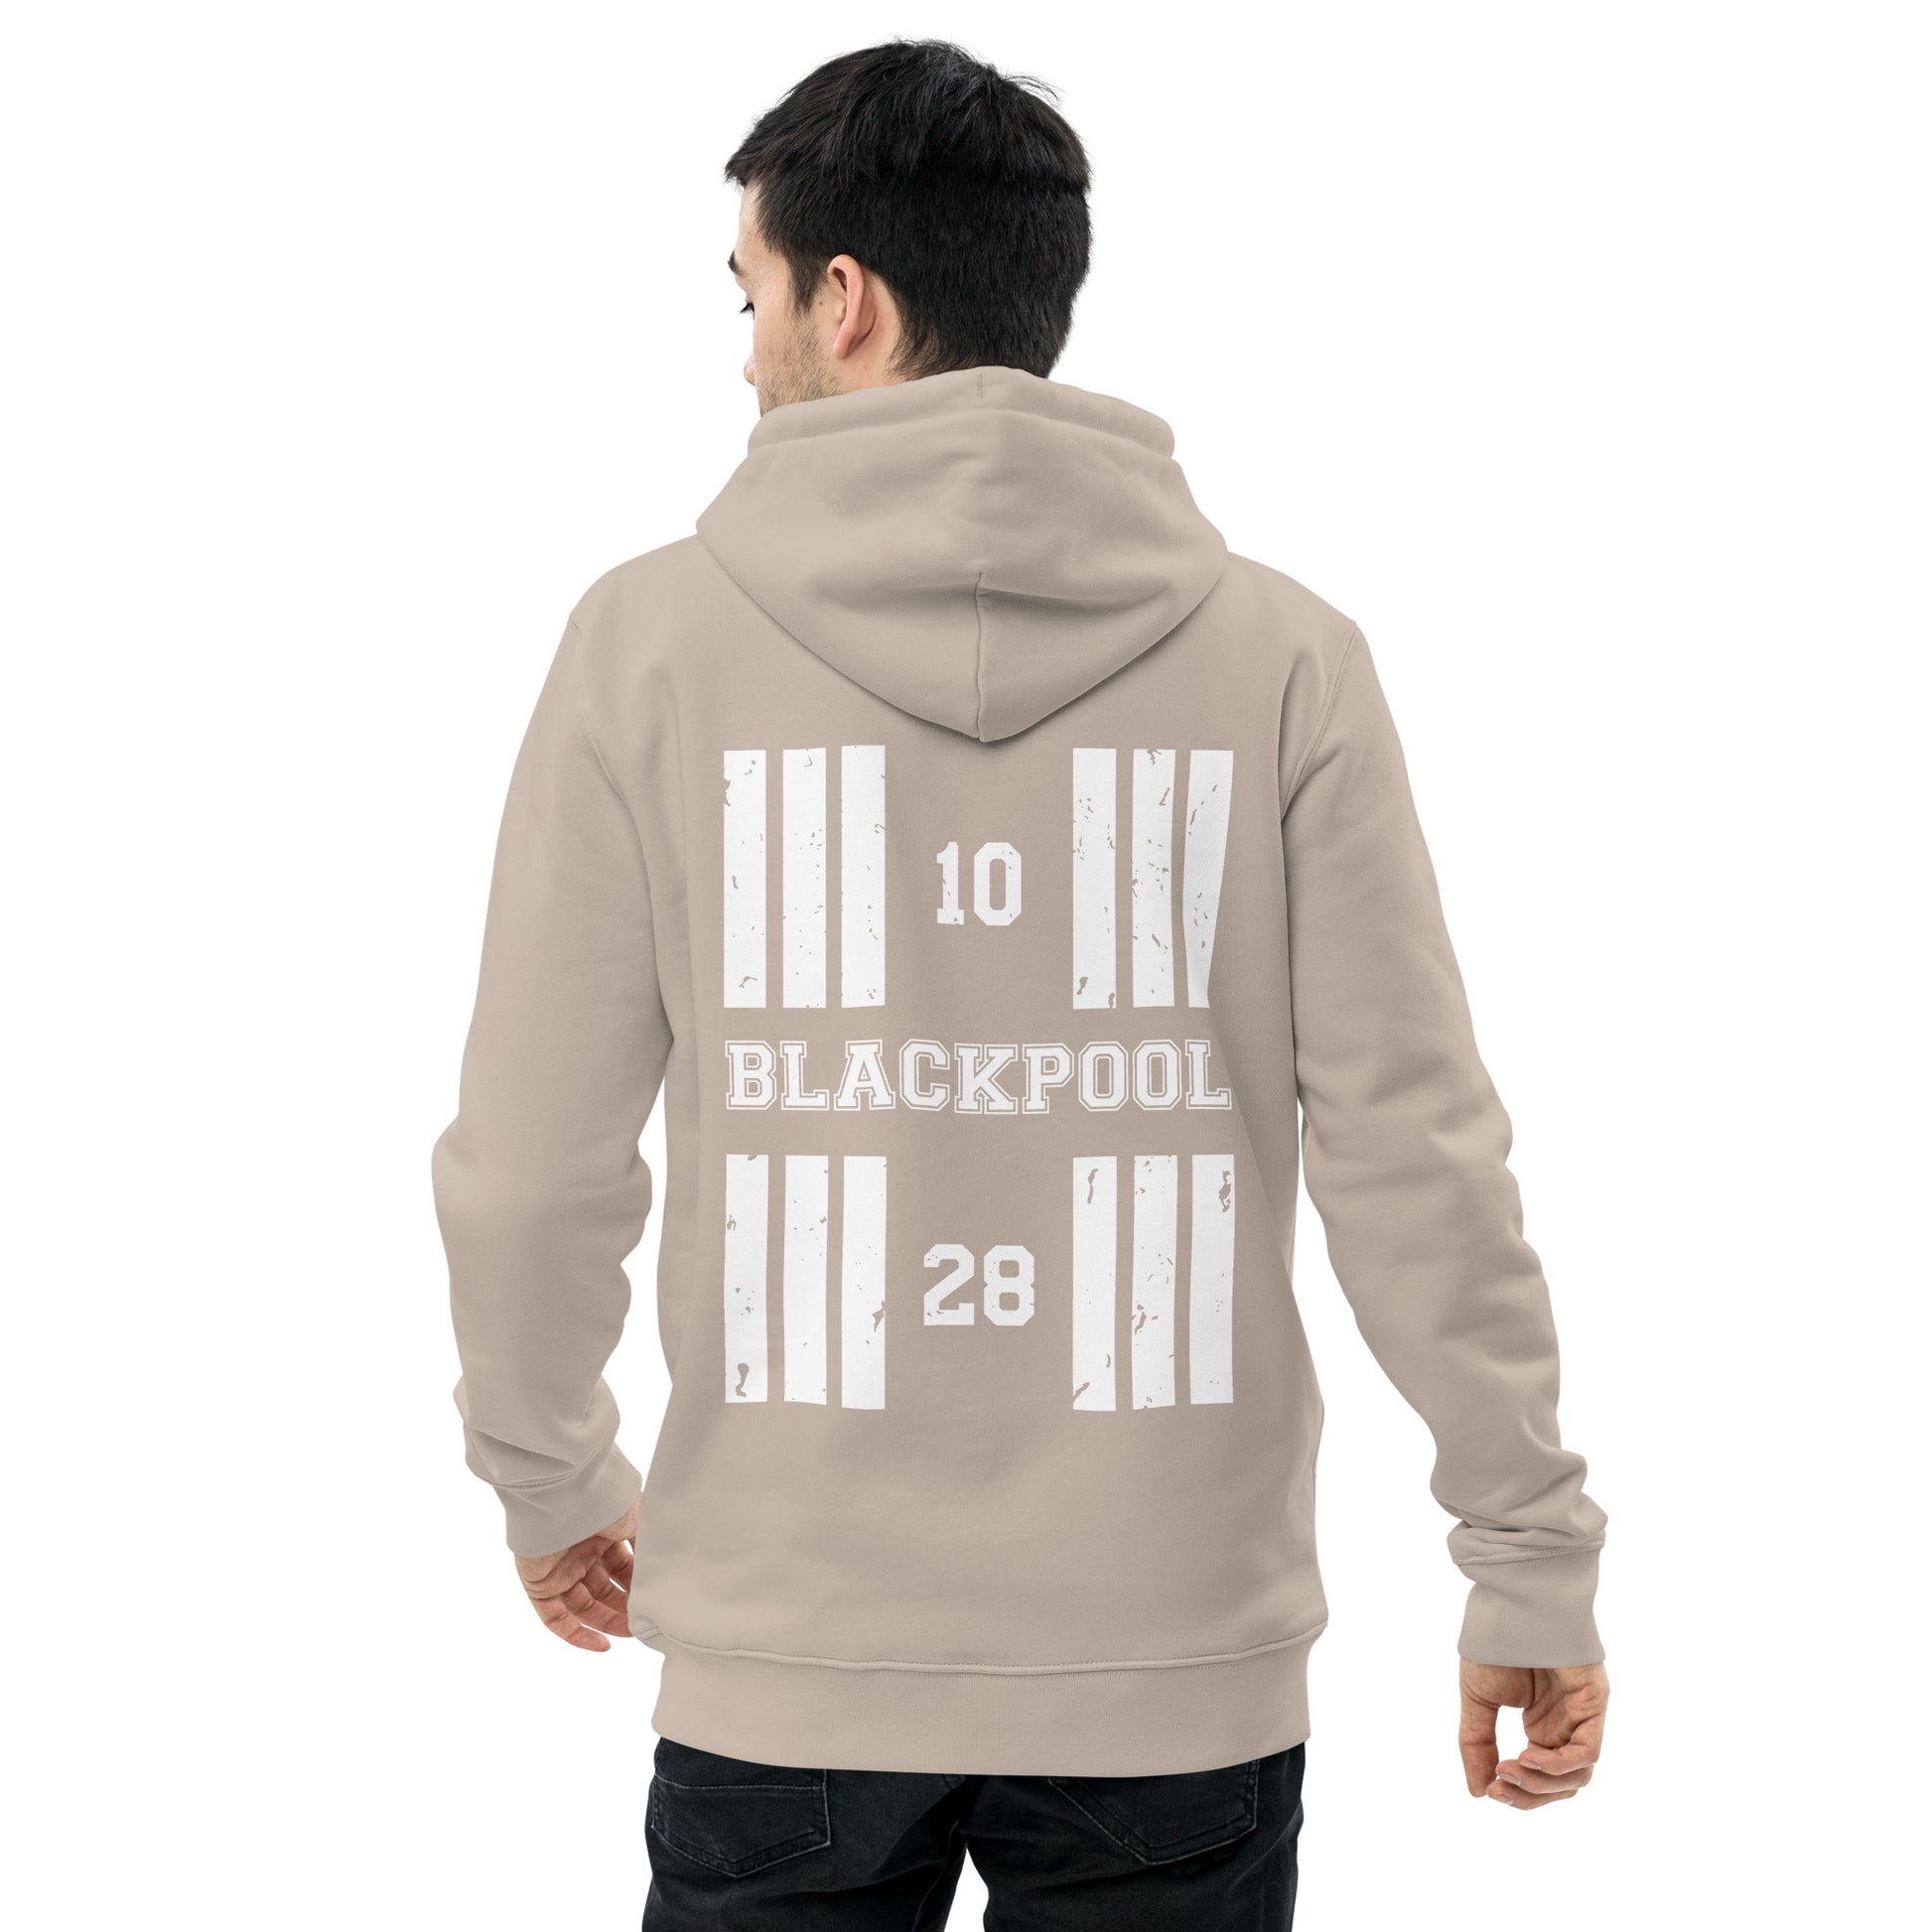 Coloured in a sandy gray called desert dust the Blackpool Airport Designator heavyweight hoodie features a discreet collegiate print on the front with a bold print featuring the airport's name and designator, framed by stylised distressed threshold markings on the back.